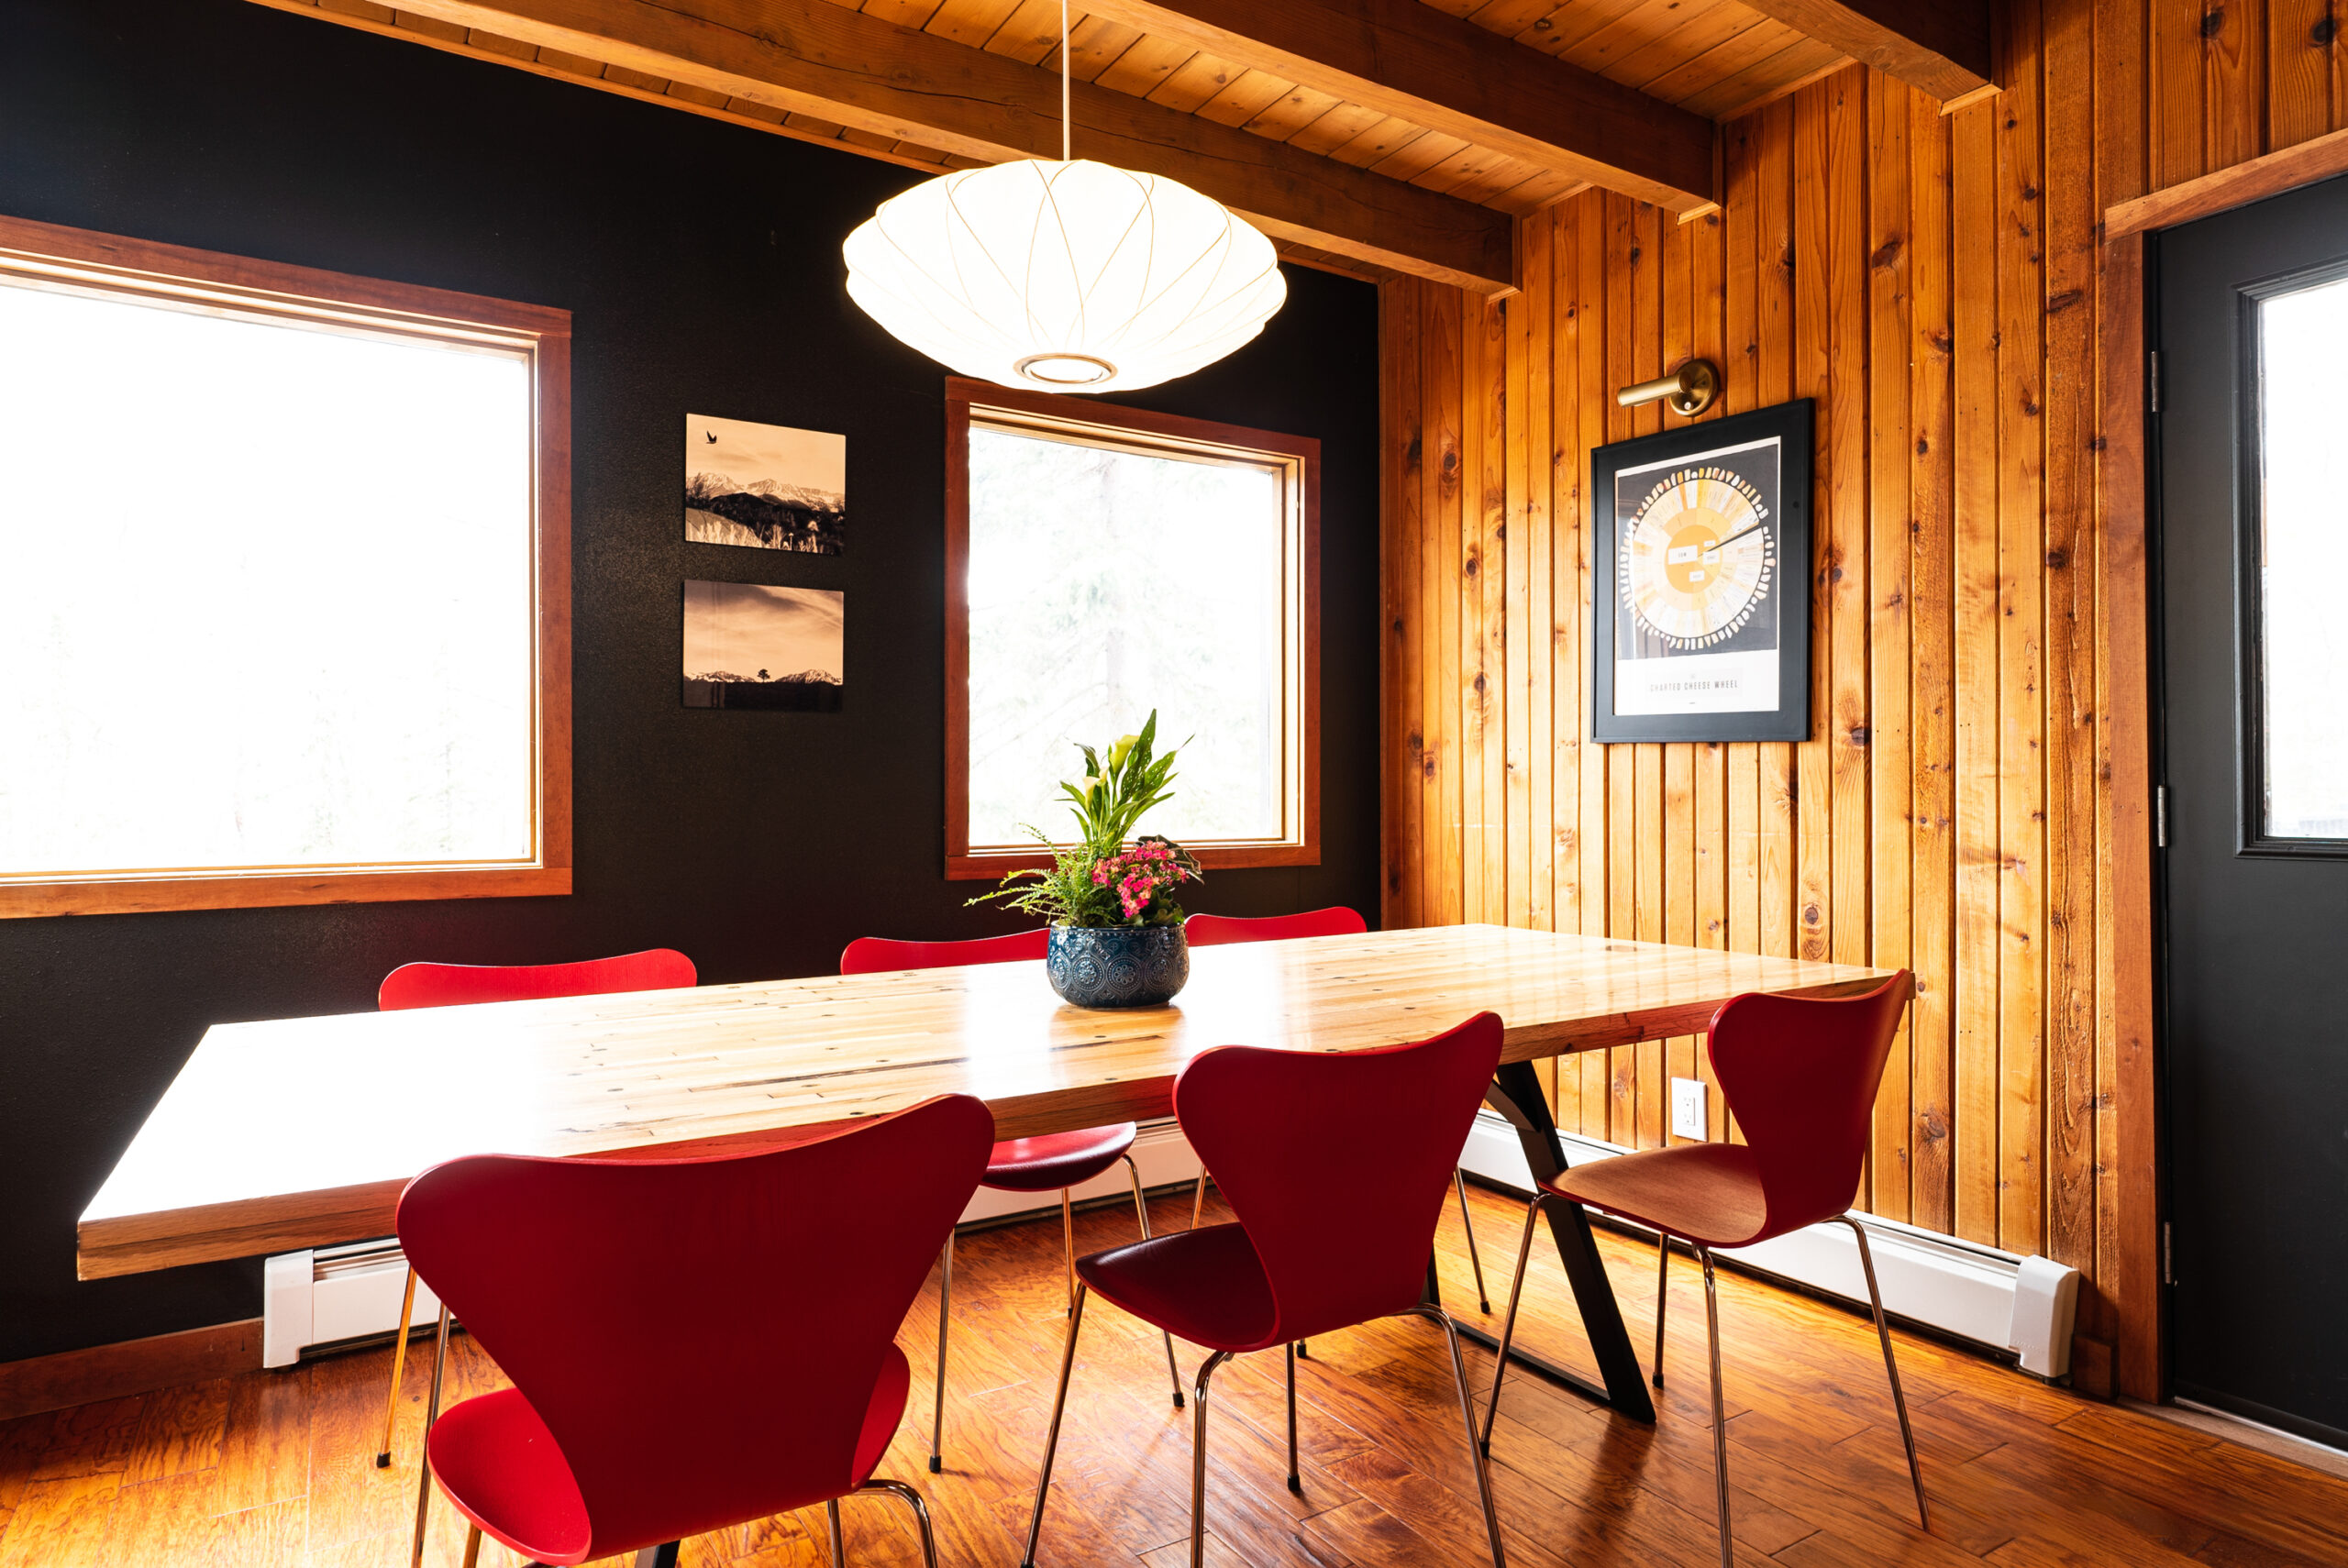 The image showcases a dining area with a modern and cozy aesthetic, featuring:

Wooden Elements: Wooden walls and a large table create a warm ambiance.
Red Chairs: Six modern design chairs add a pop of color.
Artwork: Two framed pieces adorn the walls, enhancing the decor.
Natural Light: Large windows flood the space with daylight.